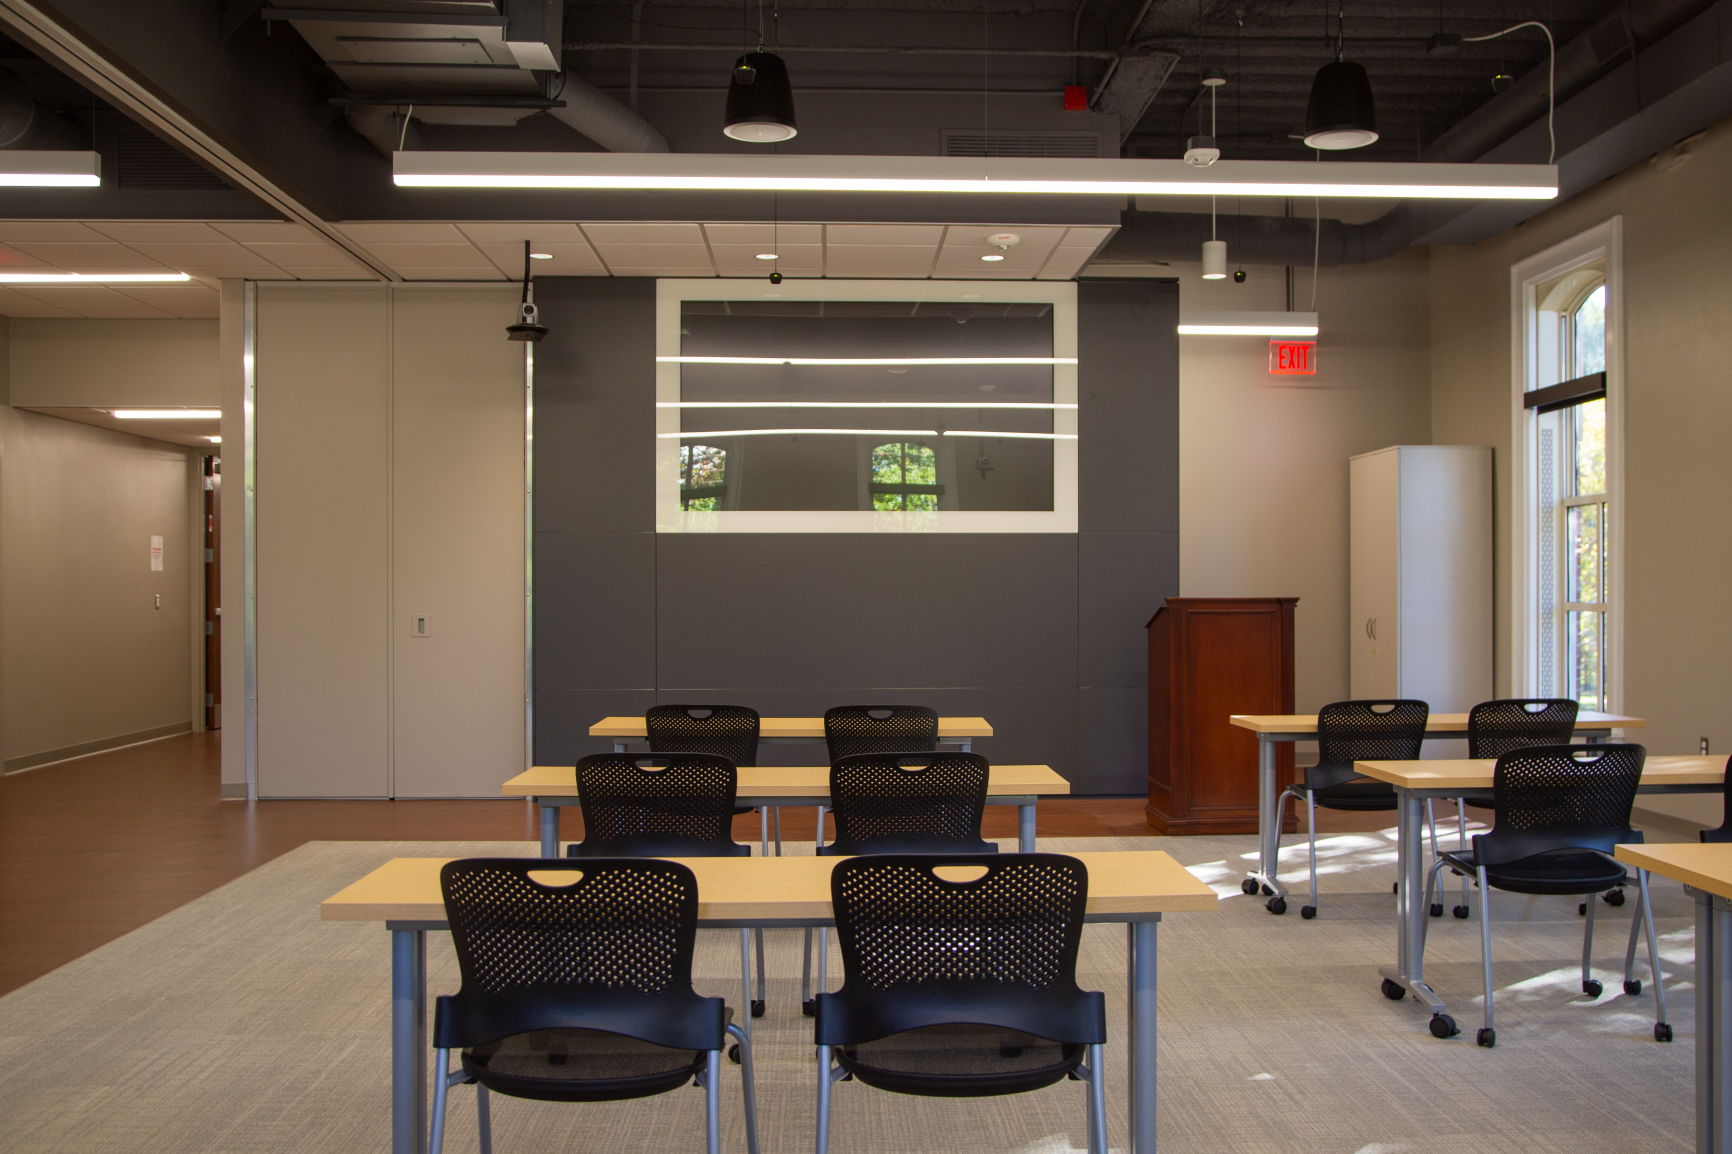 A large, integrated TV (DIRTT, once again!) makes it easier than ever to show class materials to students, both virtually and in the classroom.